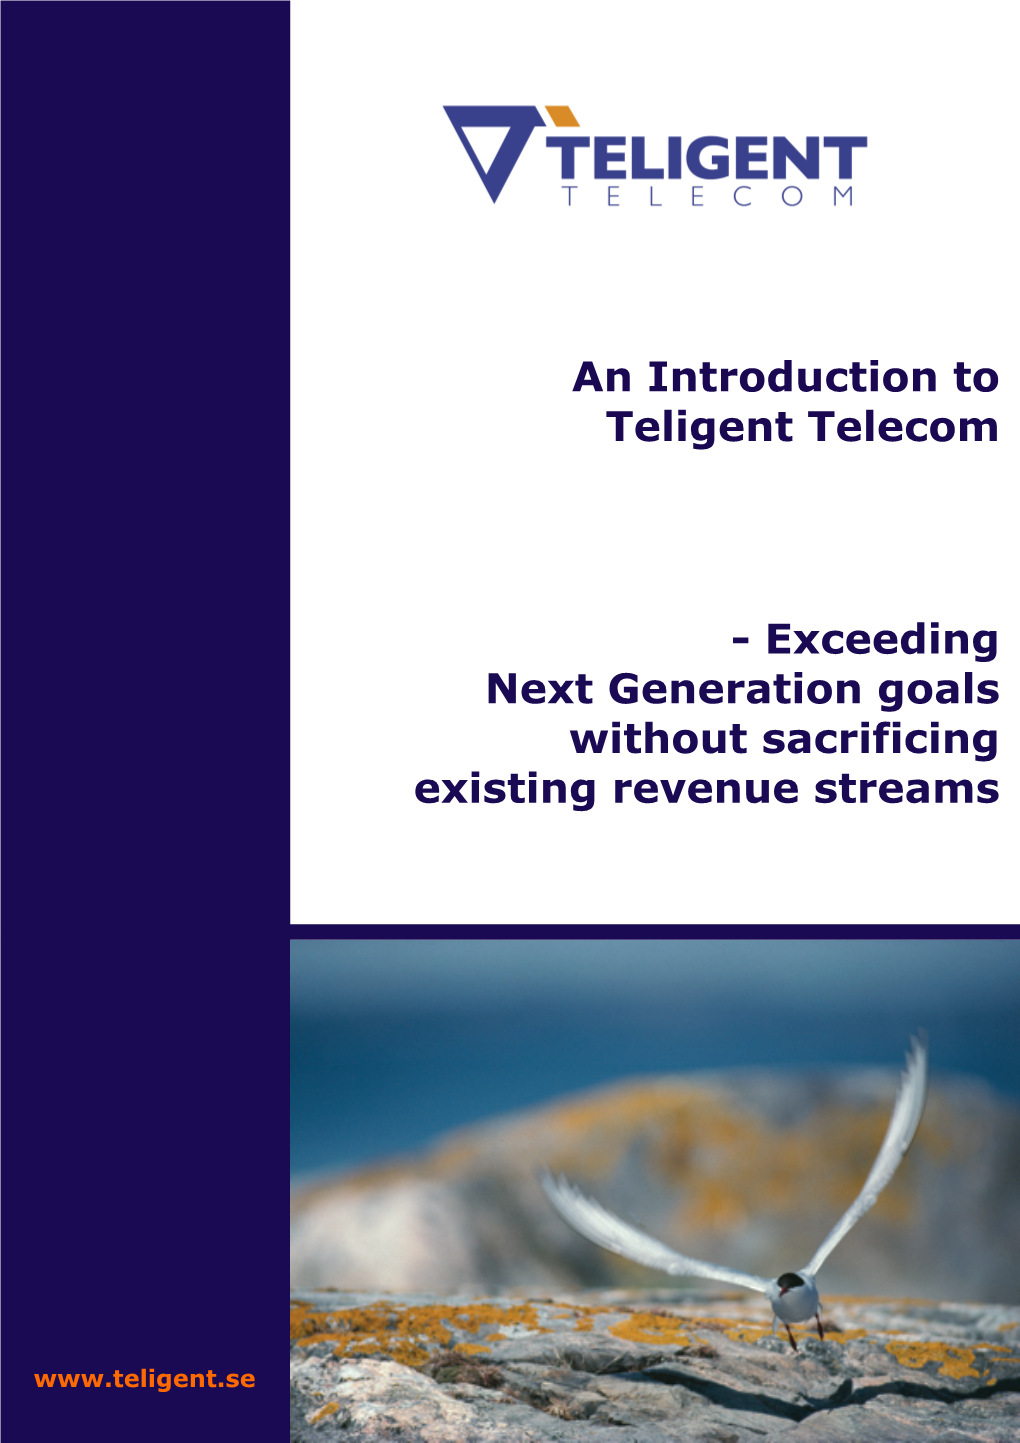 Exceeding Next Generation Goals Without Sacrificing Existing Revenue Streams